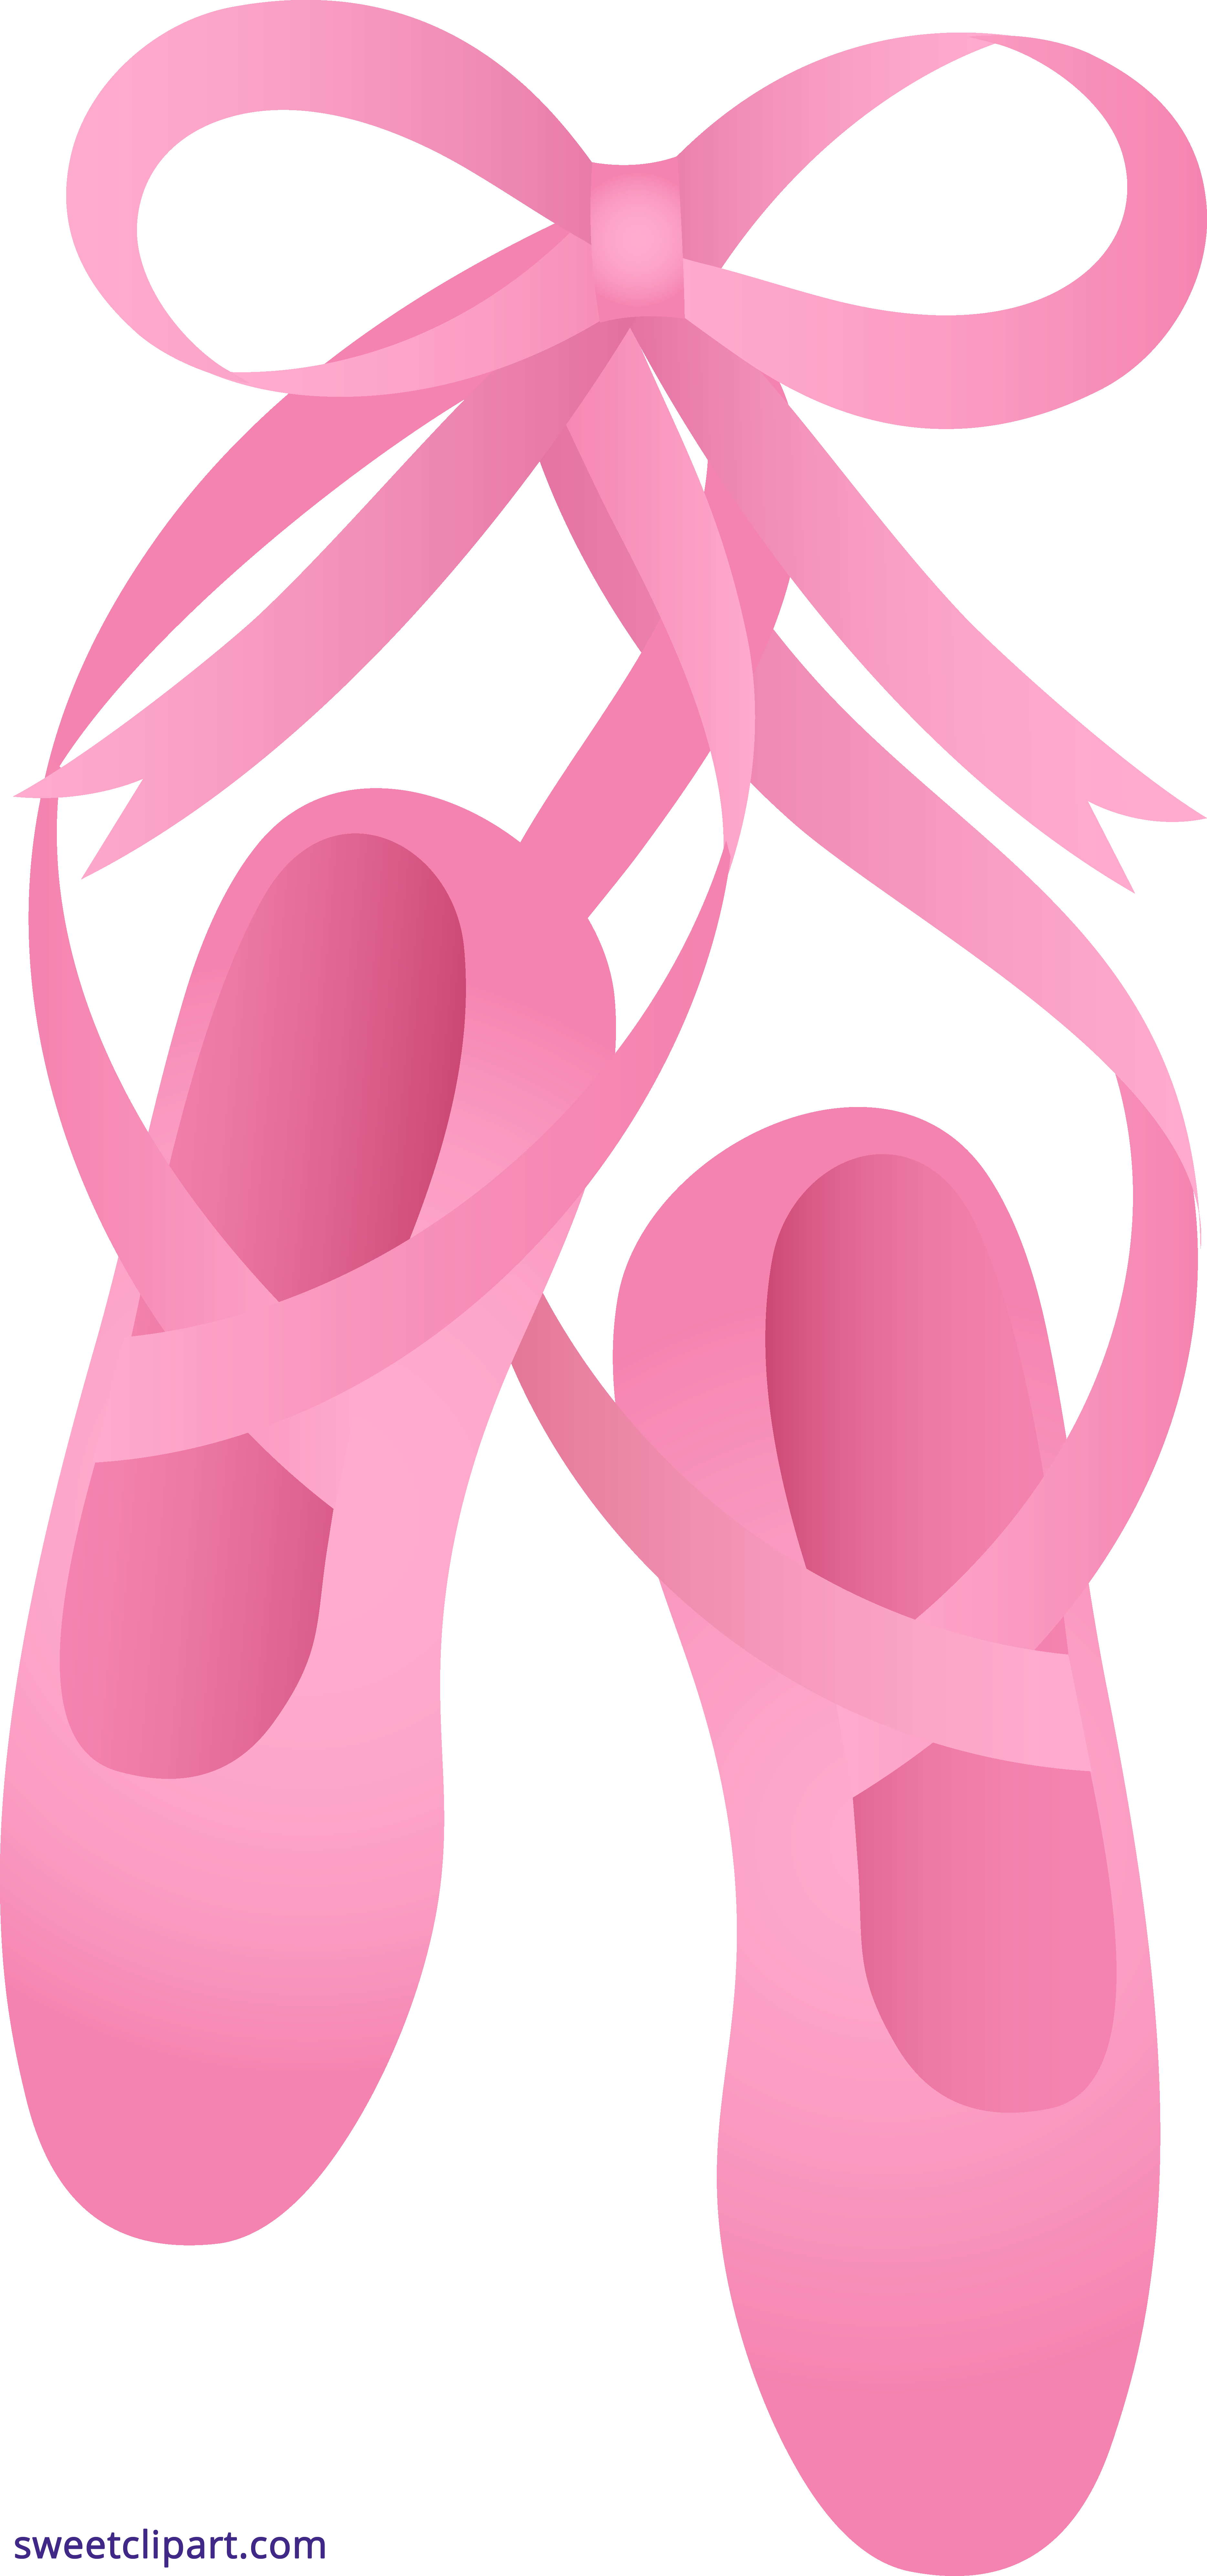 Clipart backpack shoe. Pink ballet slippers sweet